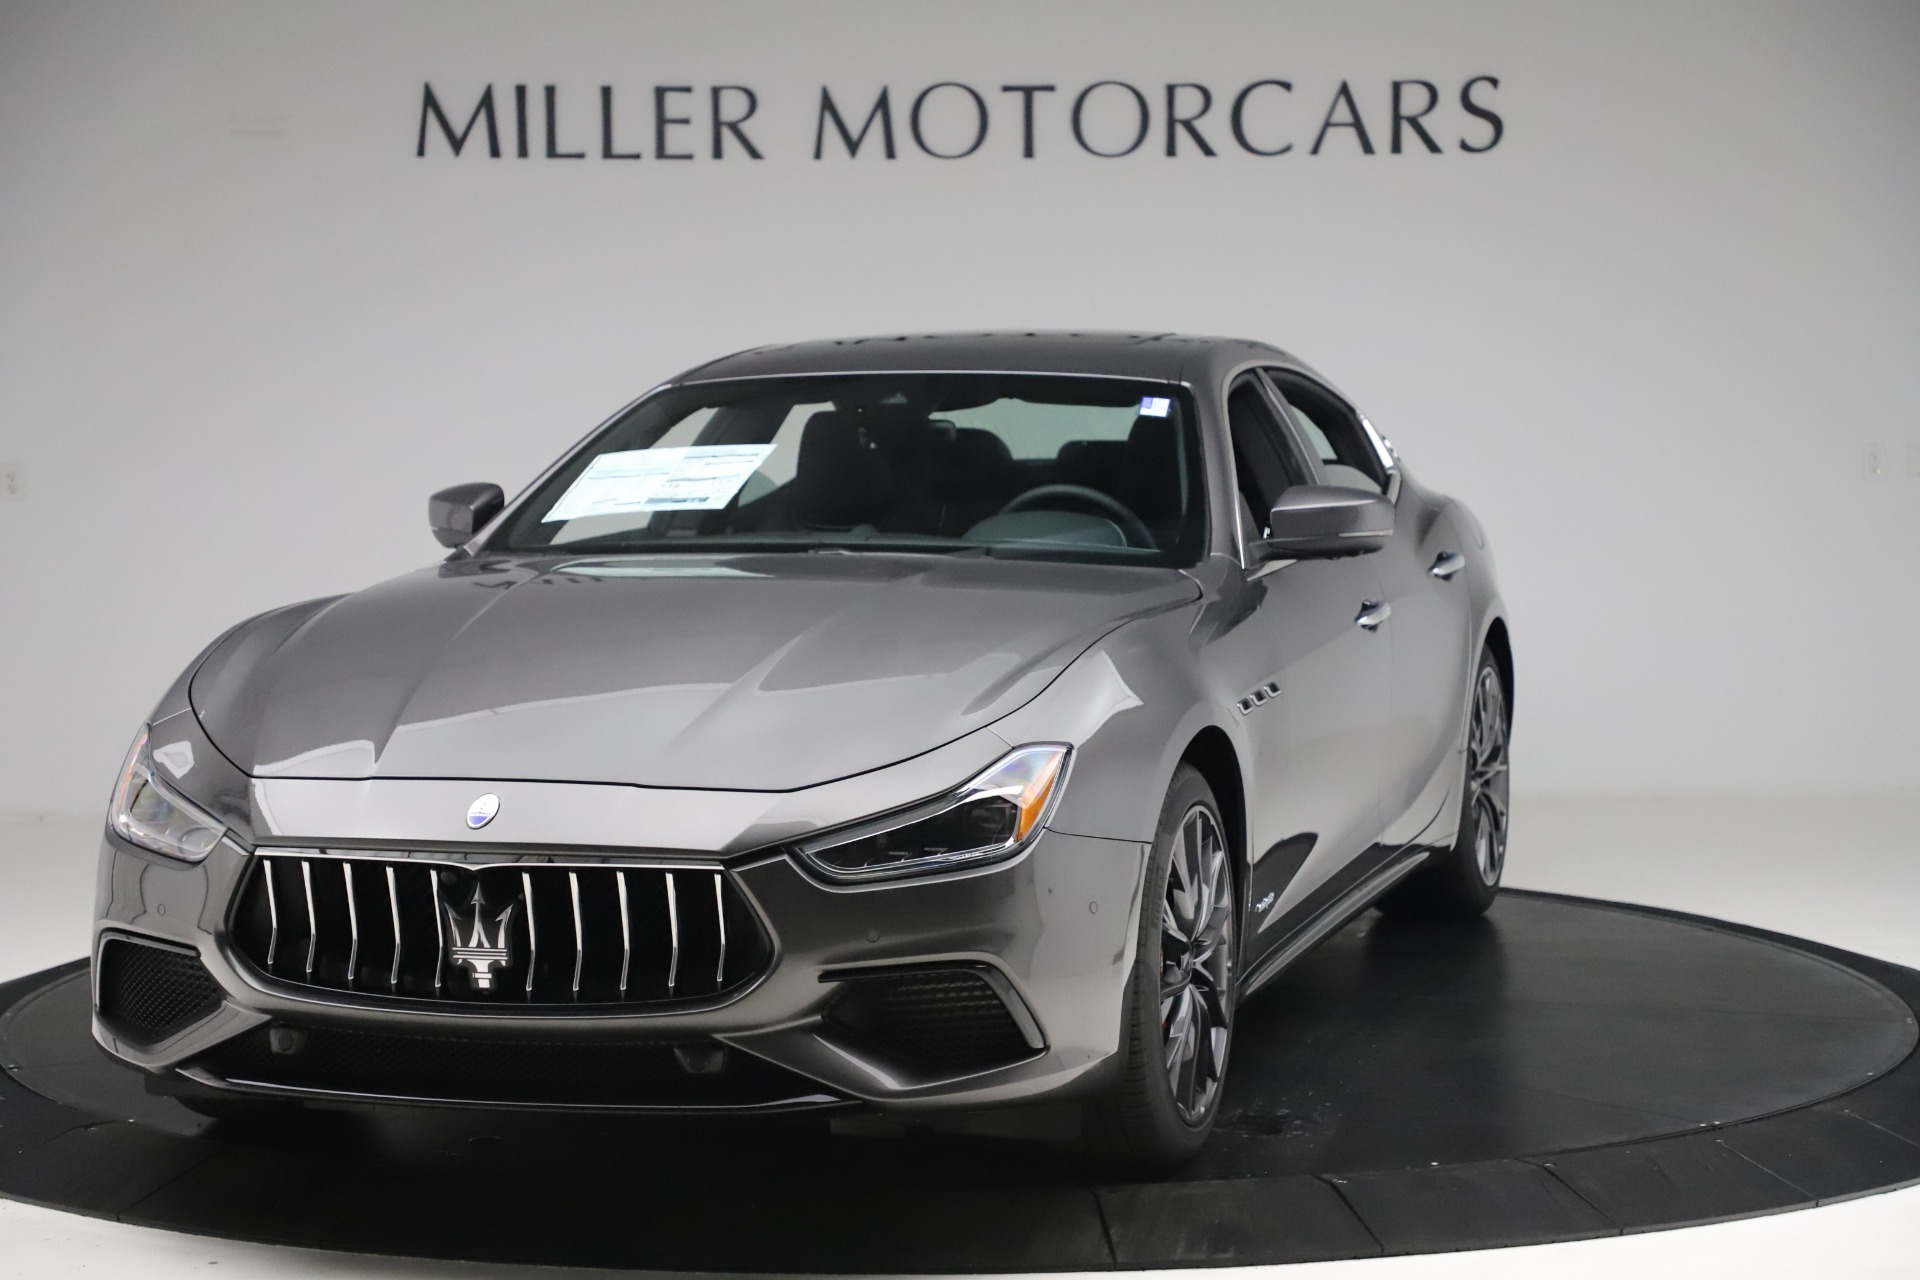 New 2019 Maserati Ghibli S Q4 GranSport for sale Sold at Aston Martin of Greenwich in Greenwich CT 06830 1